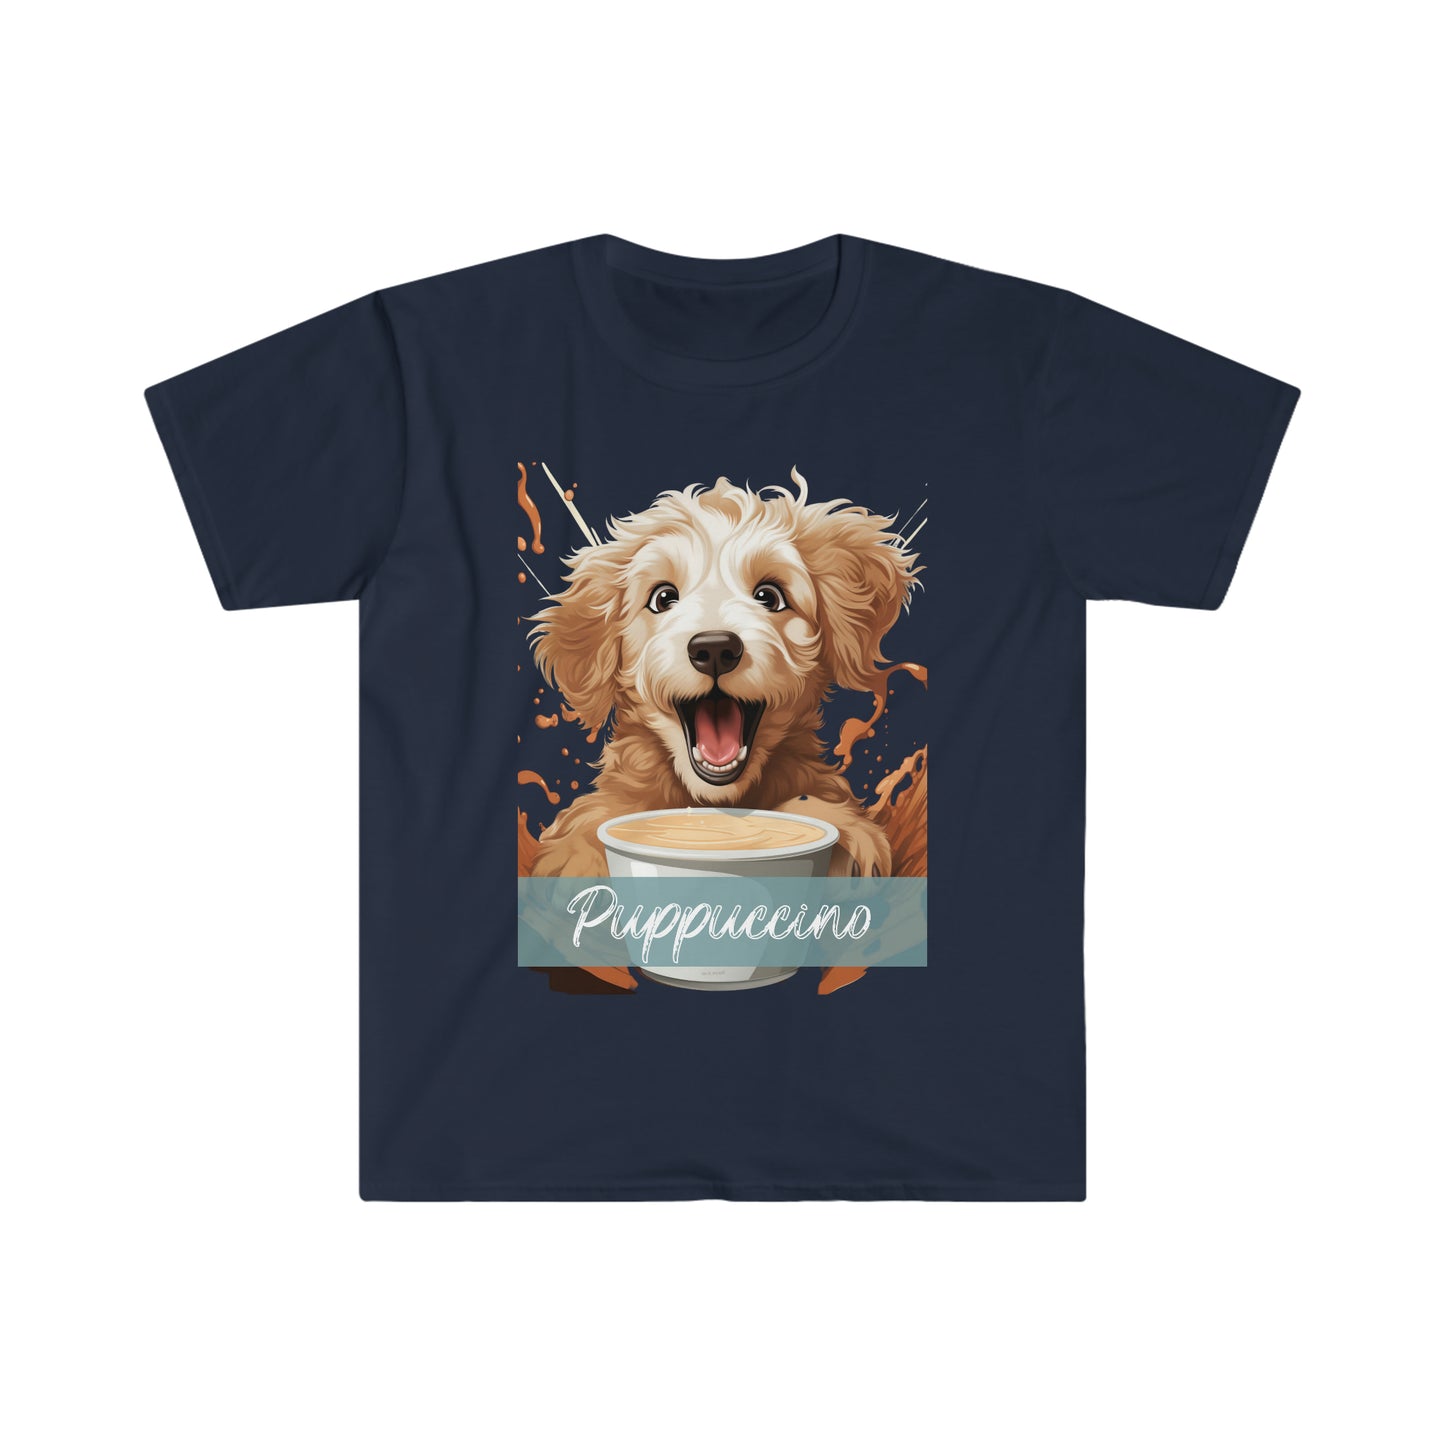 "Puppuccino" Excited Goldendoodle Unisex T-Shirt